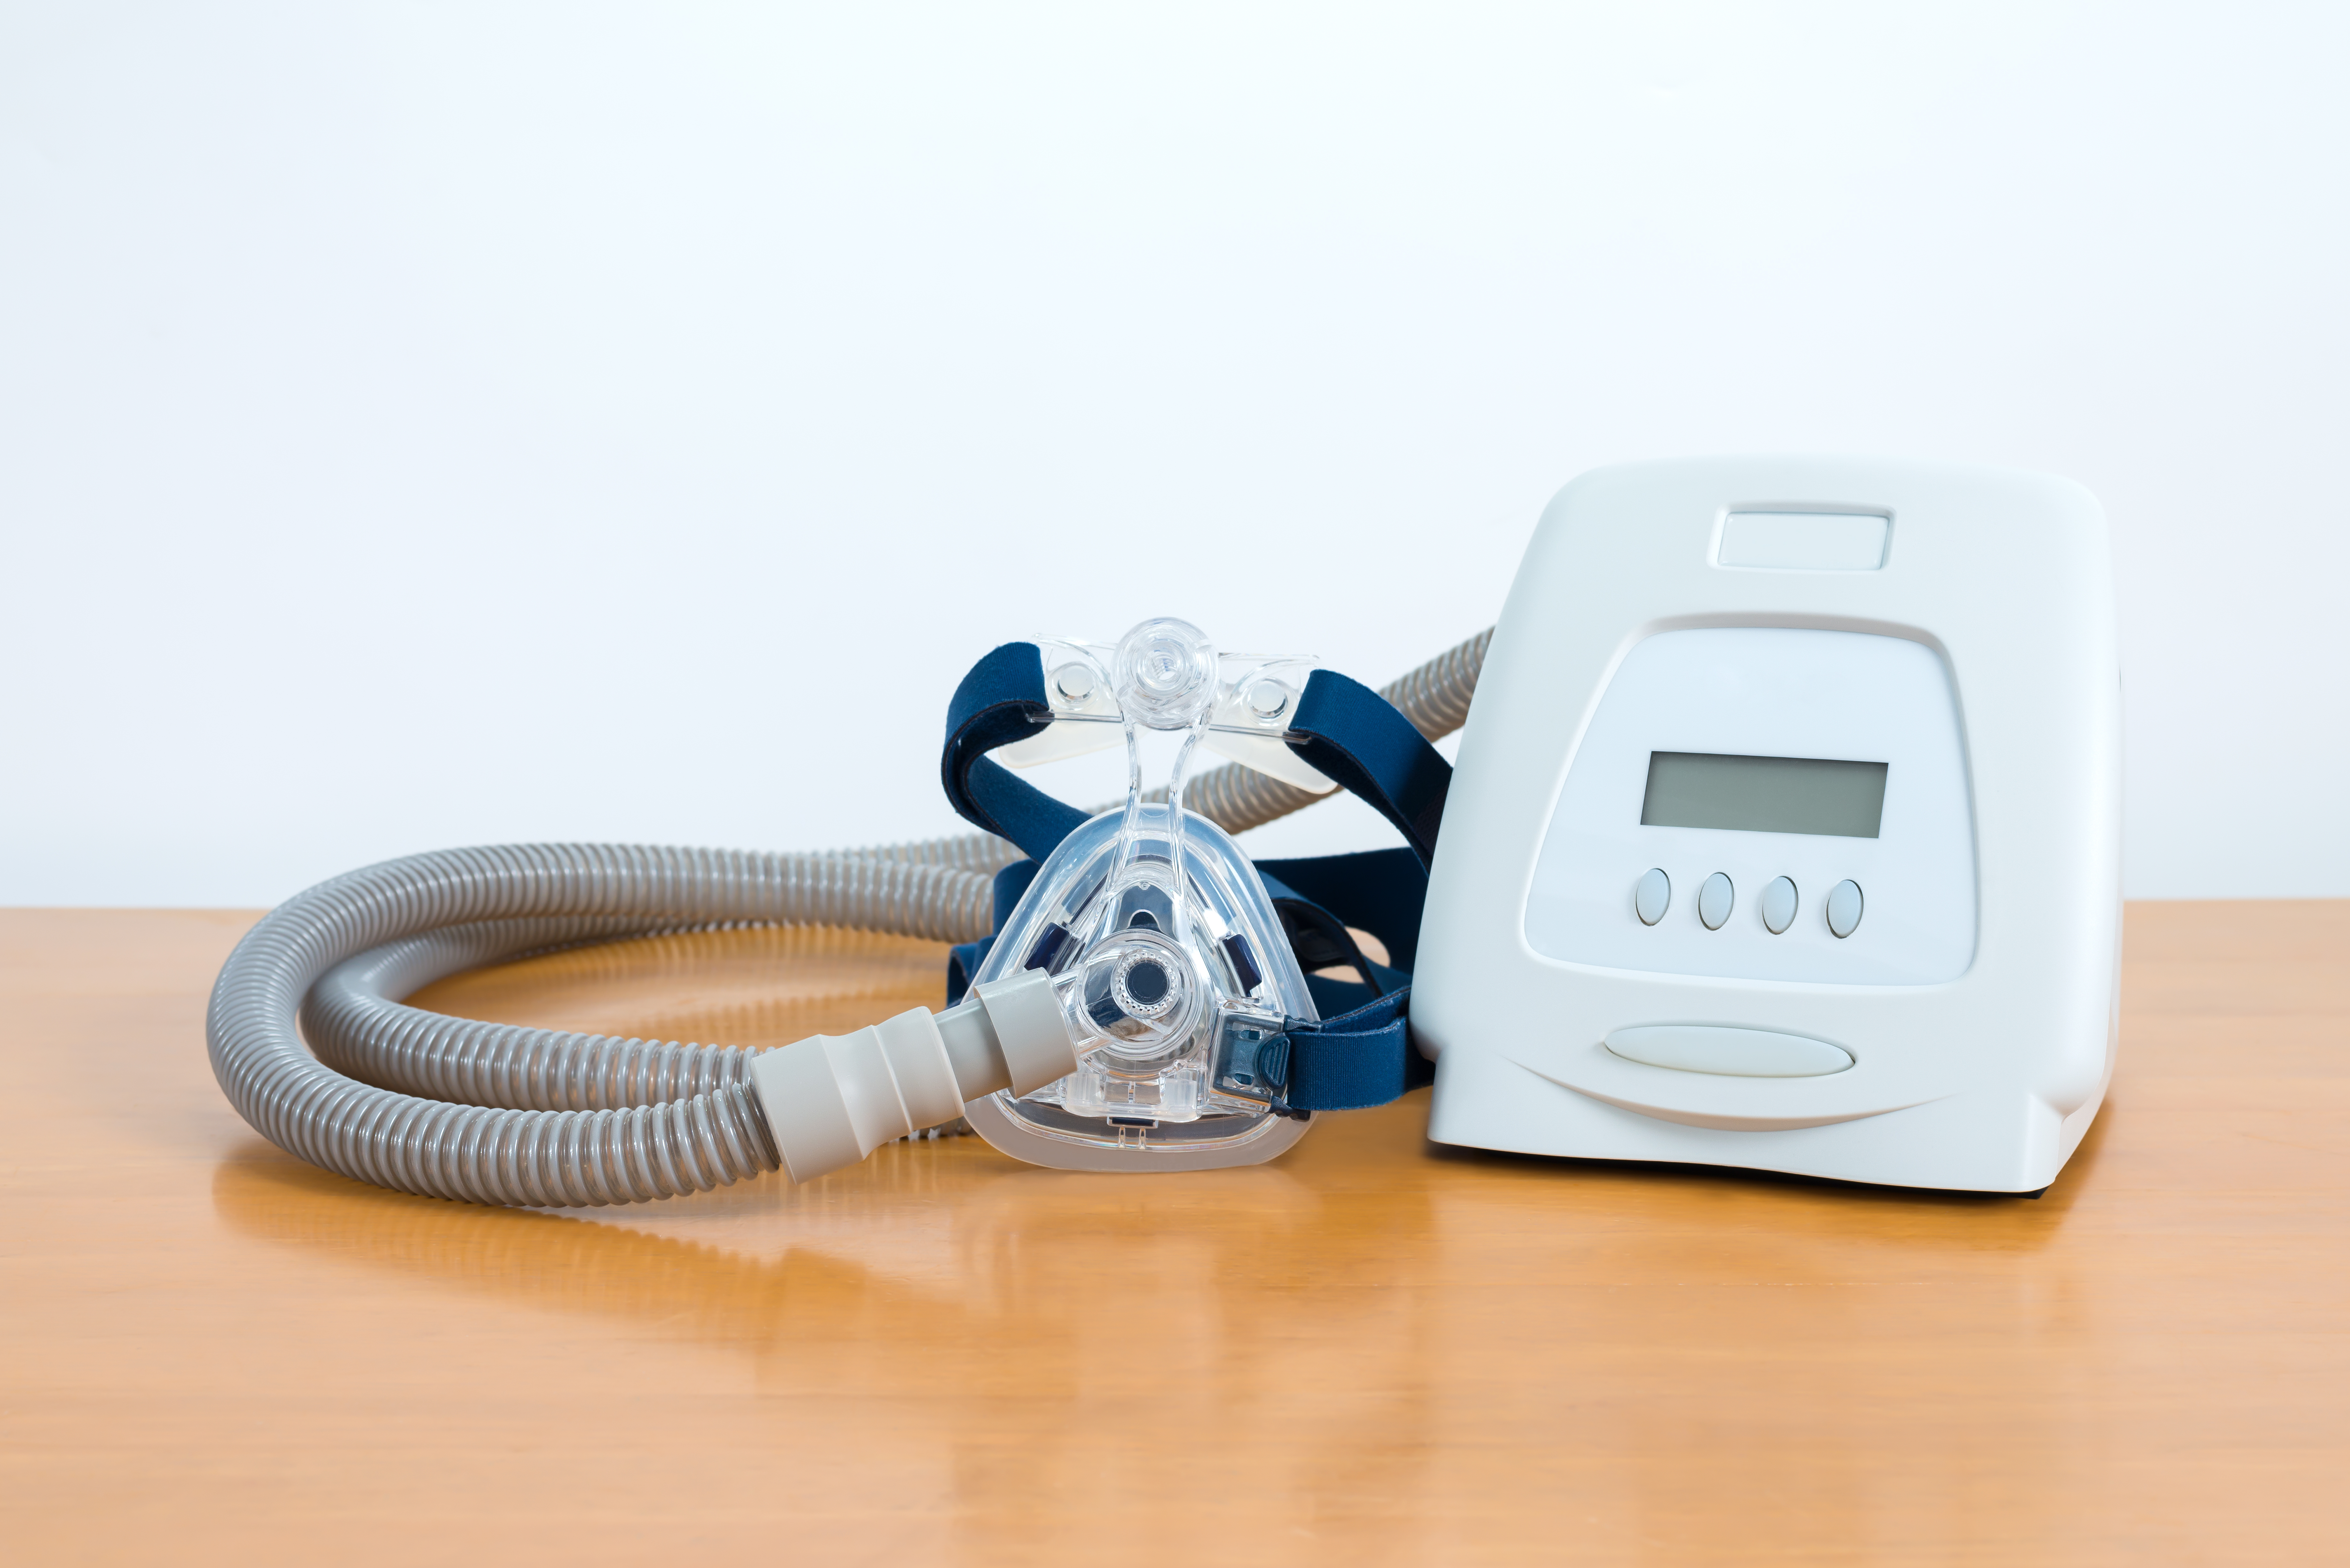 Do you know how to clean and care for your CPAP Machine? Here are some helpful tips.